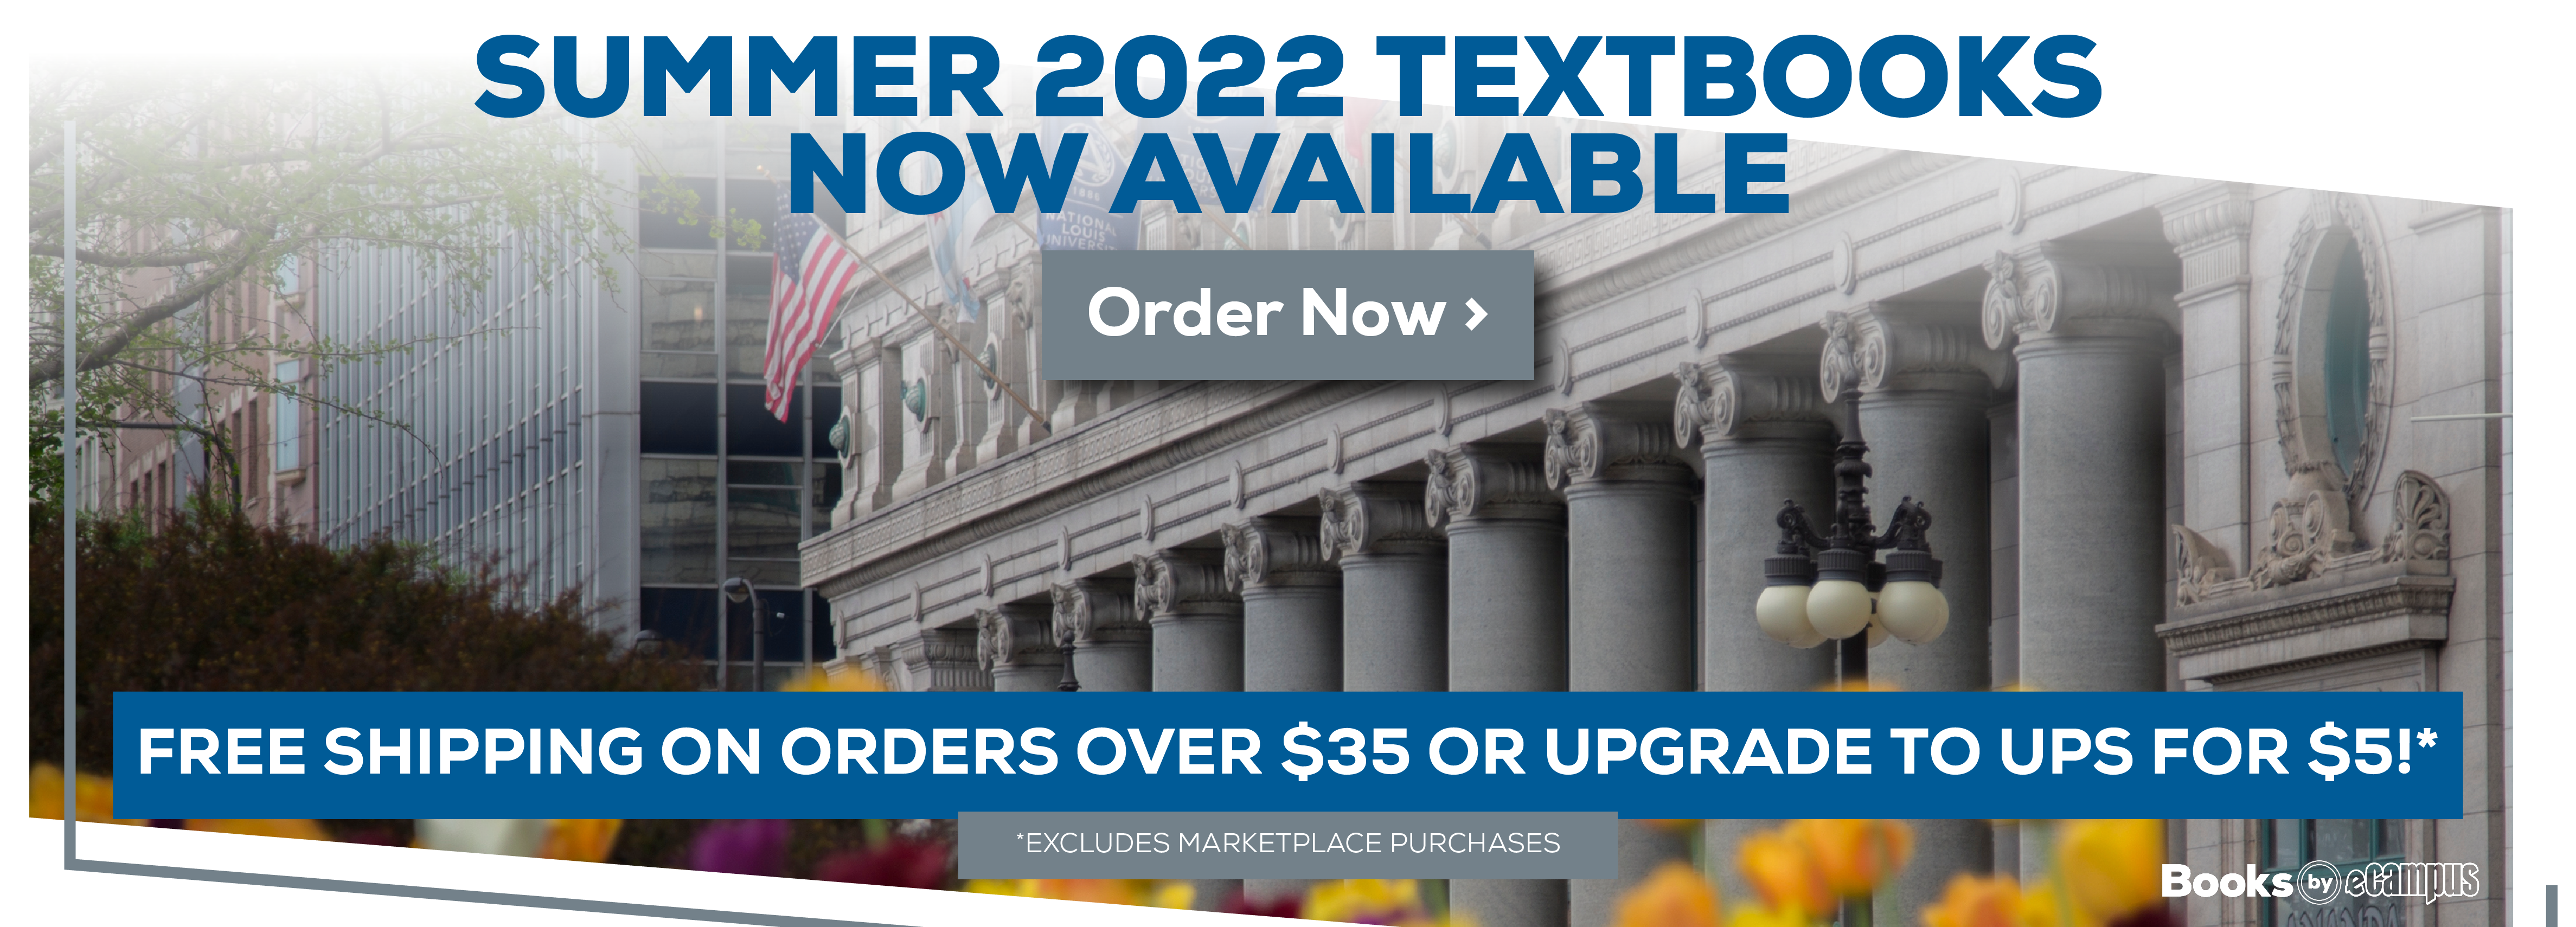 Summer 2022 Textbooks now available. Order now. Free shiping on orders over 35! upgrade to ups for $5! *excludes marketplace purchases